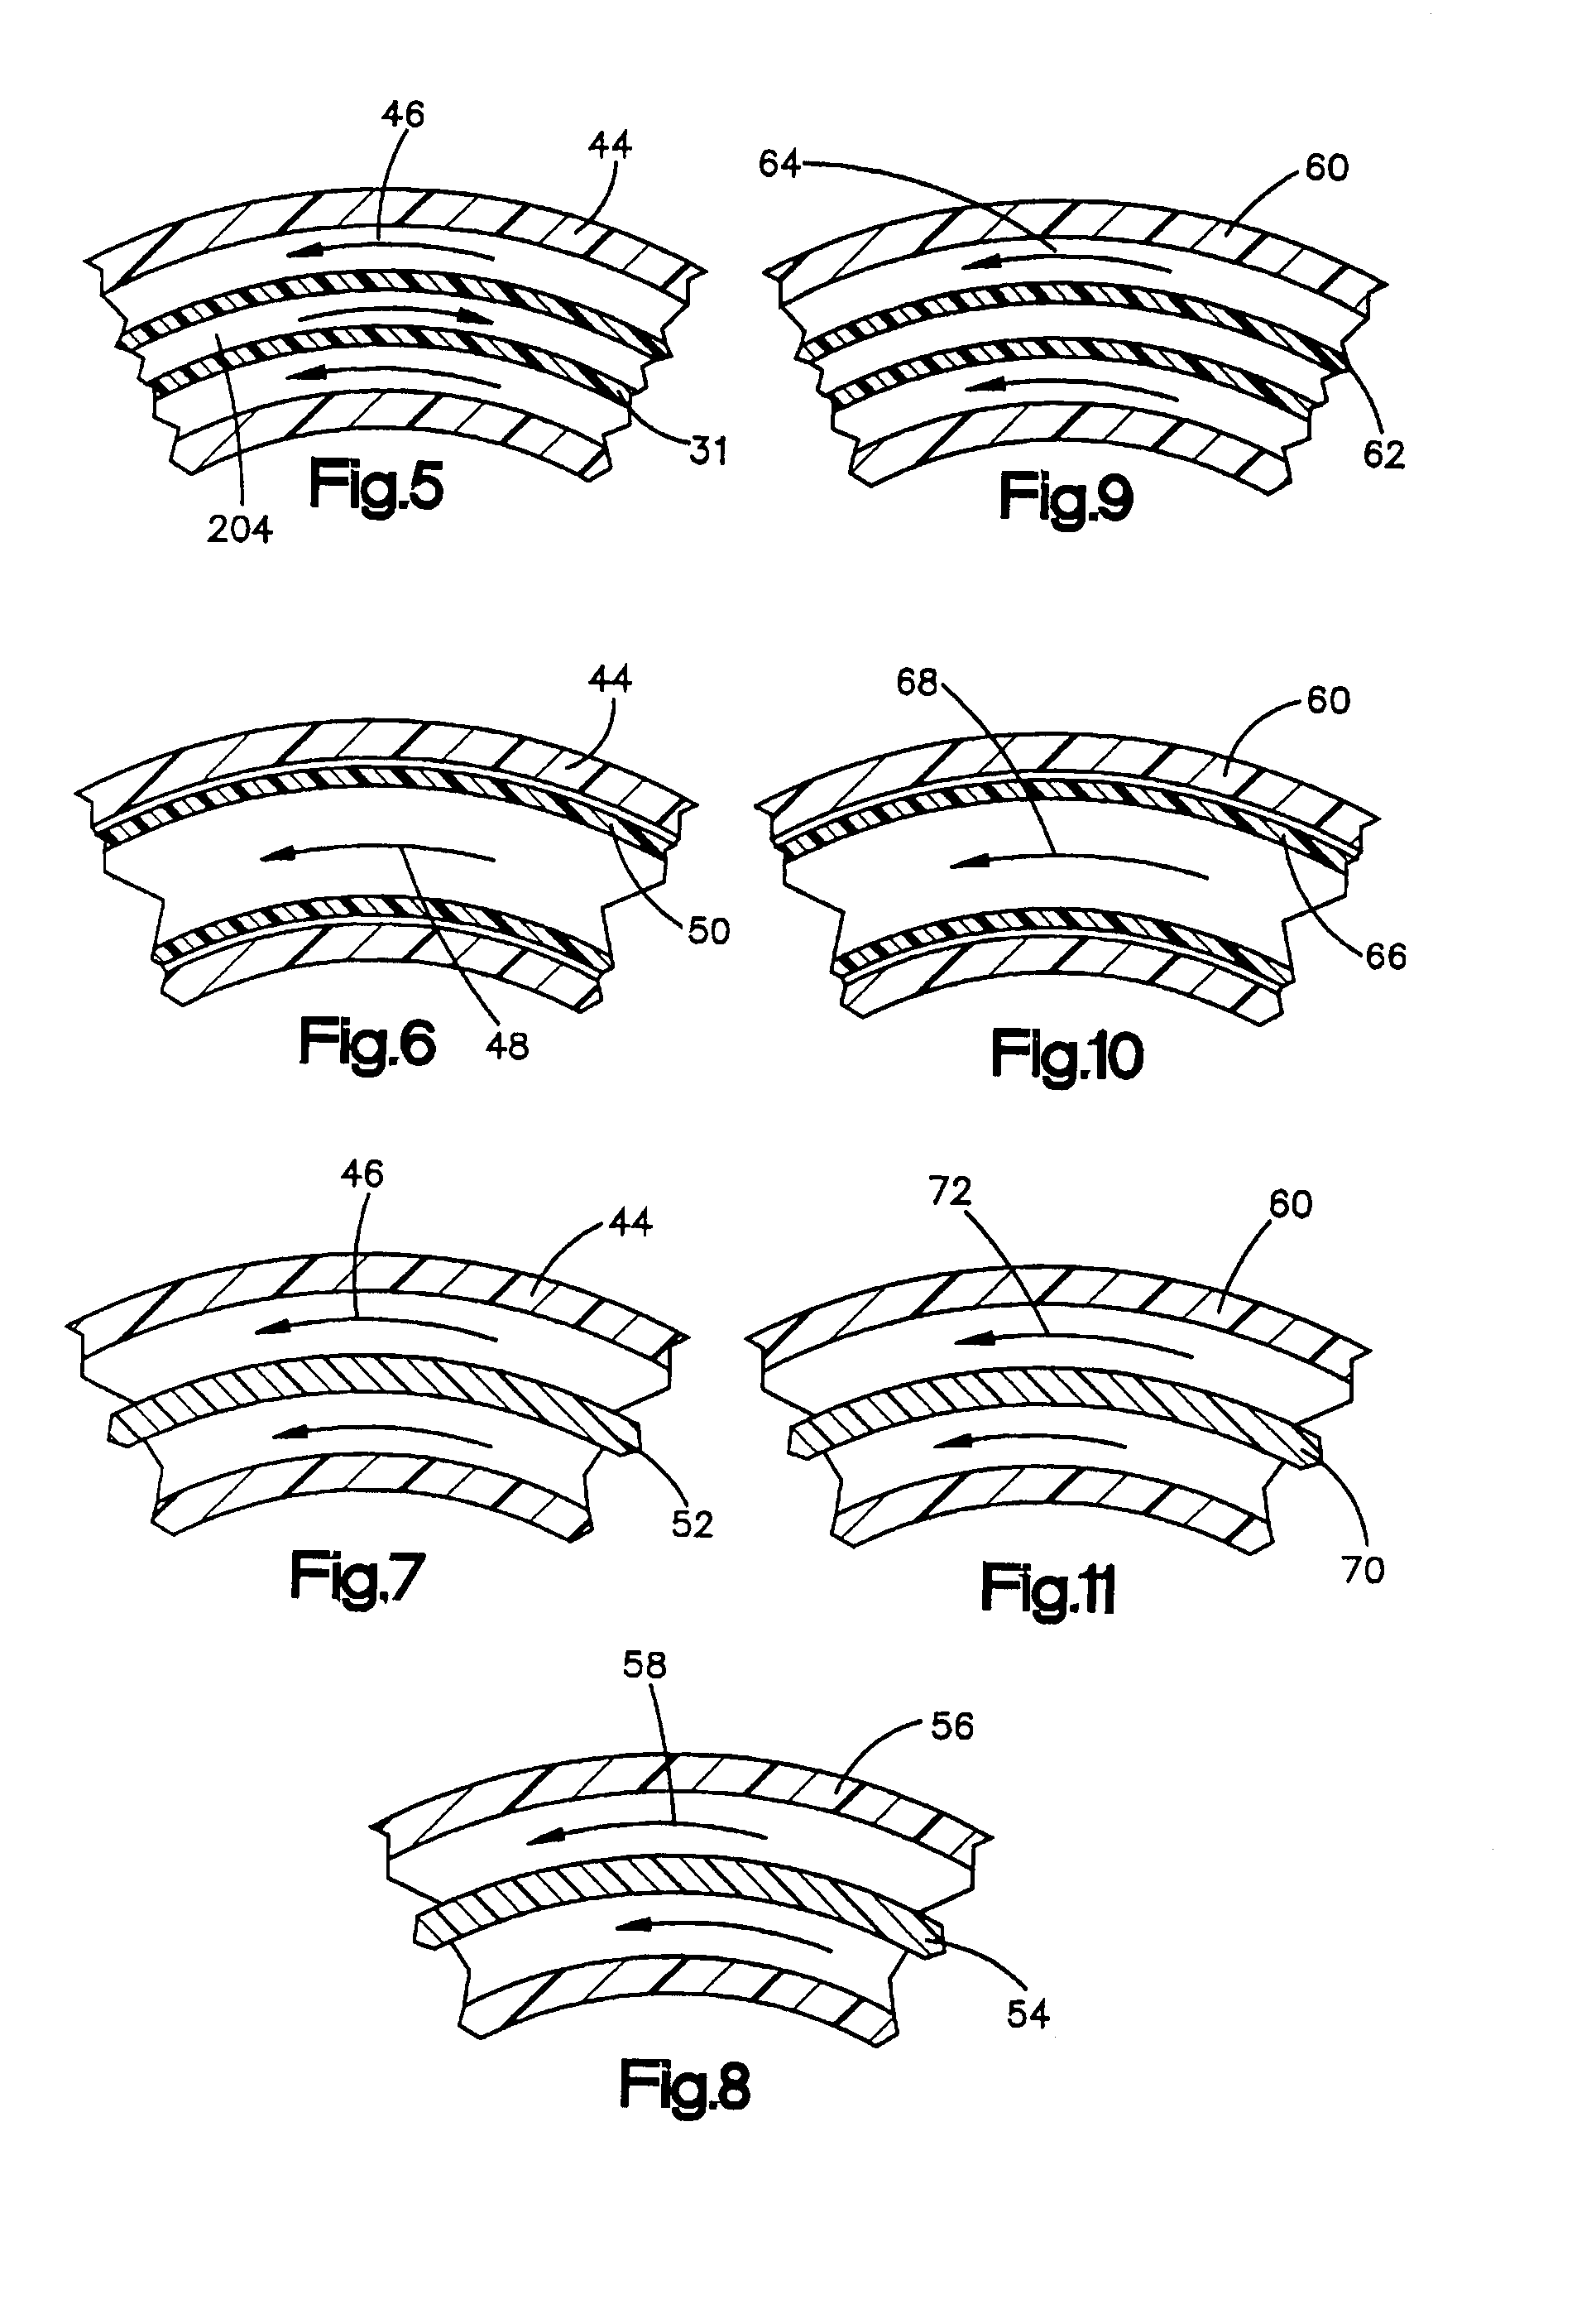 Method for harvesting and processing cells from tissue fragments